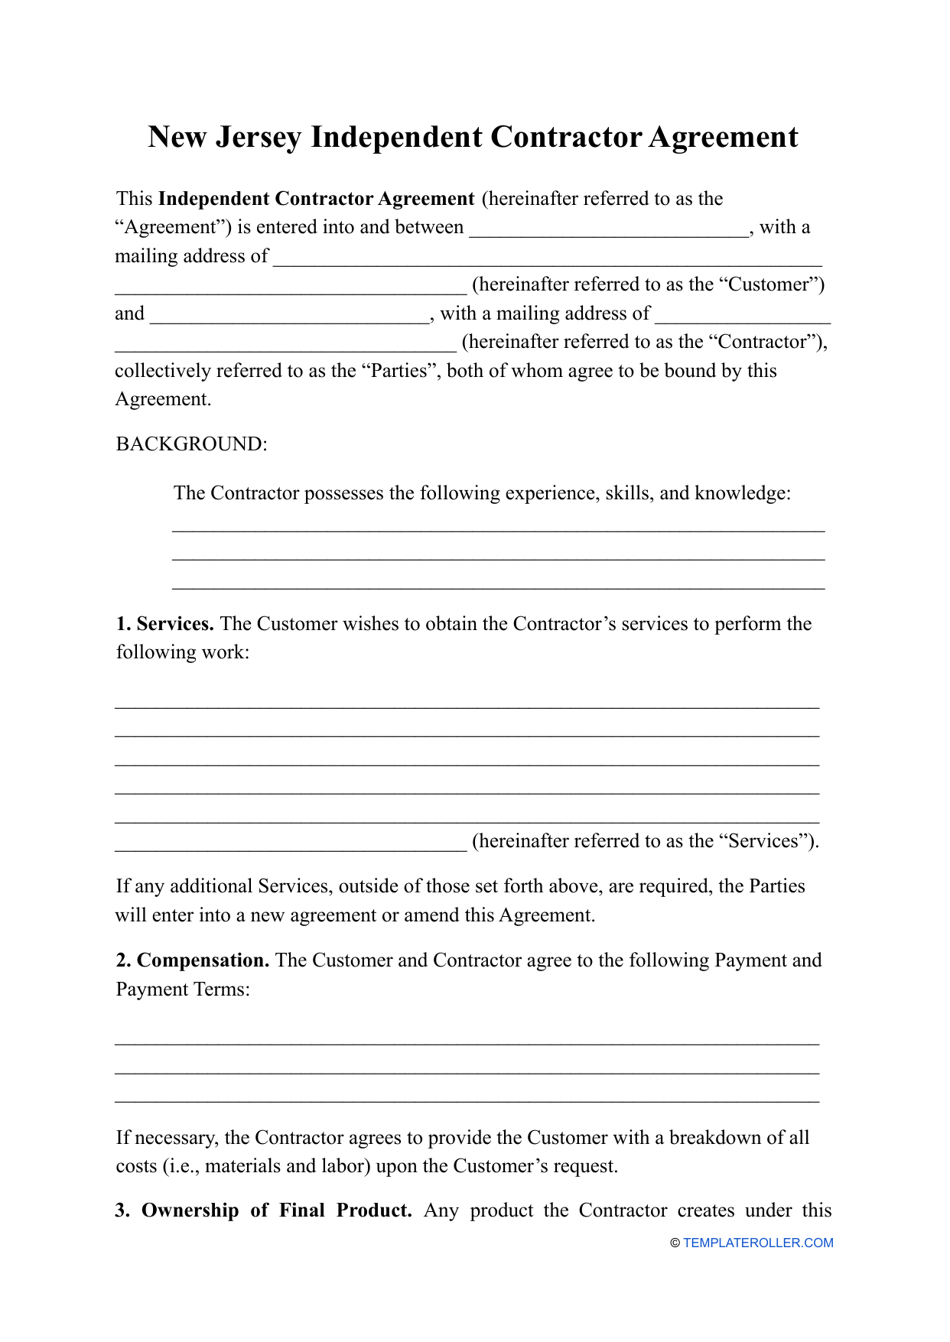 New Jersey Independent Contractor Agreement Template Fill Out Sign